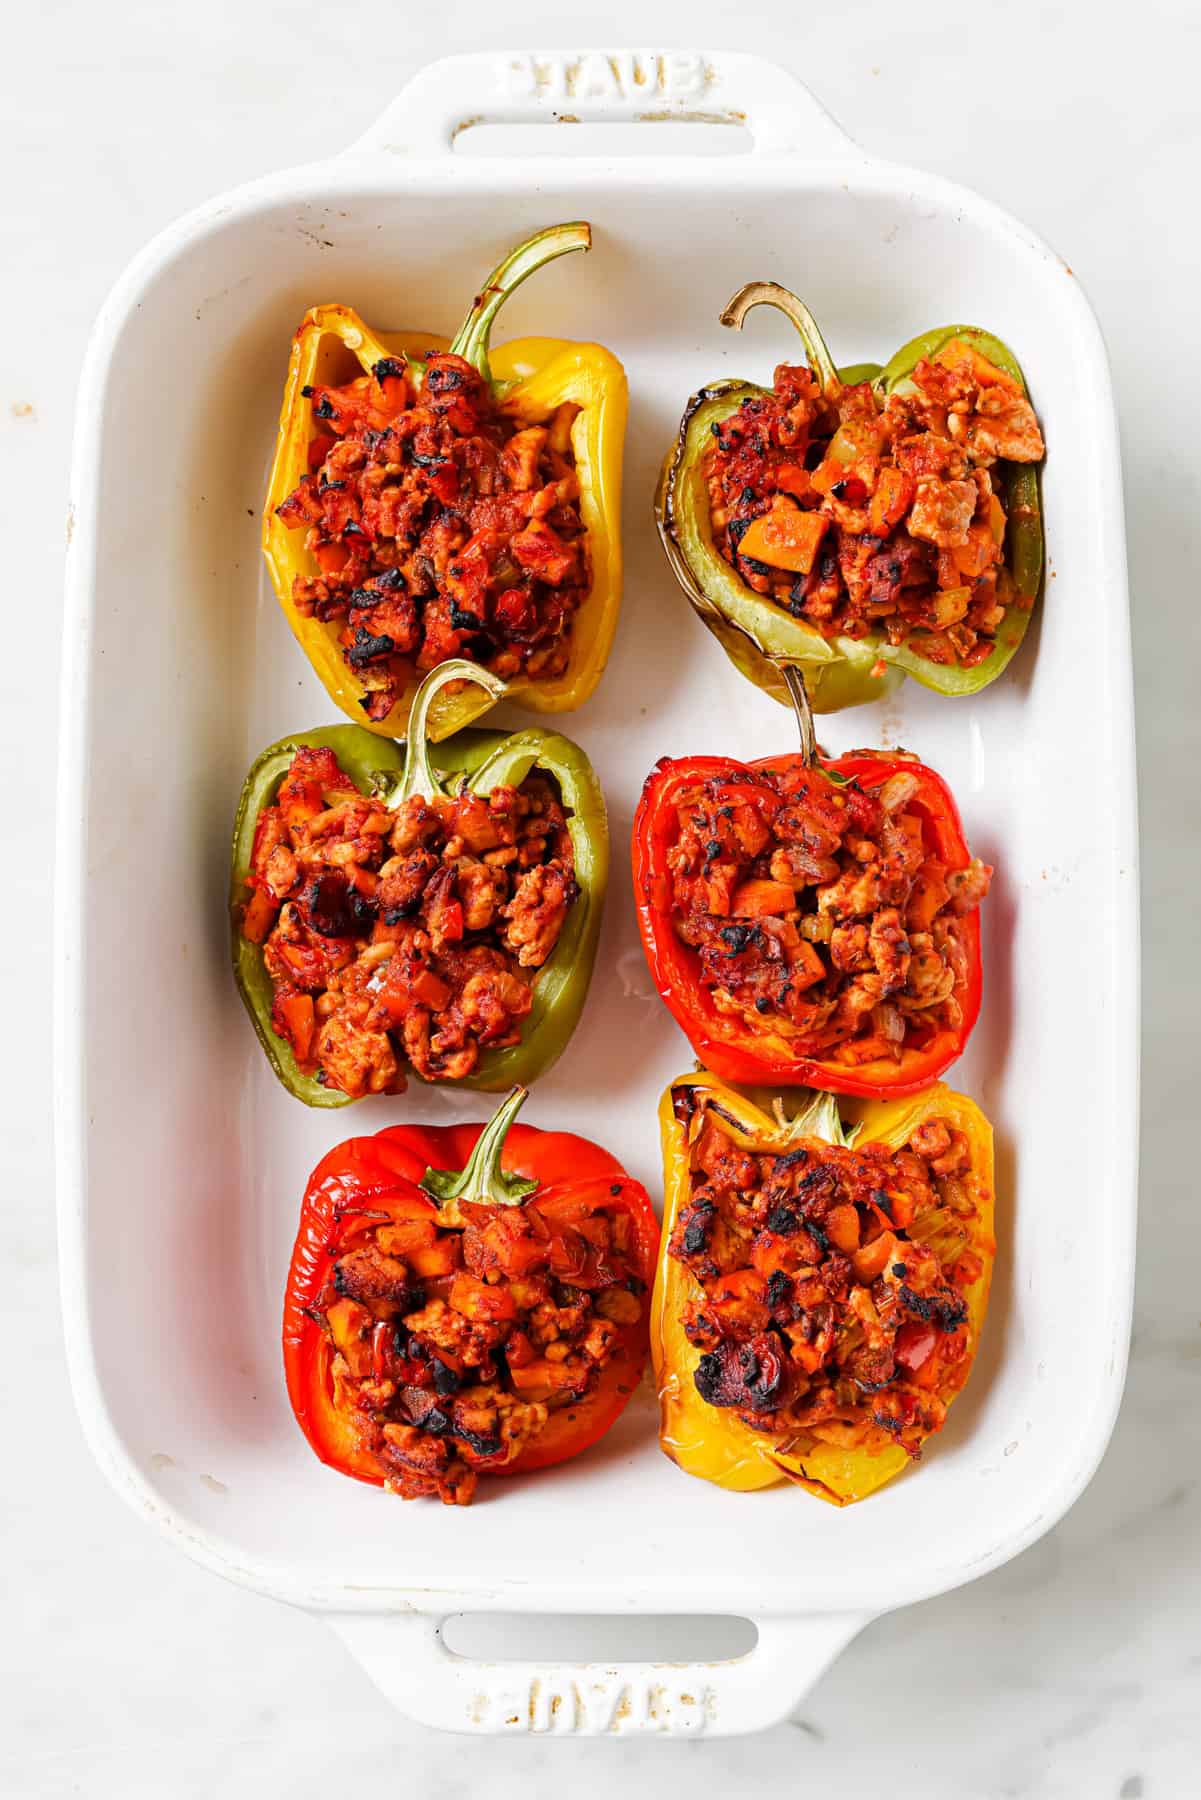 Stuffing the peppers. 